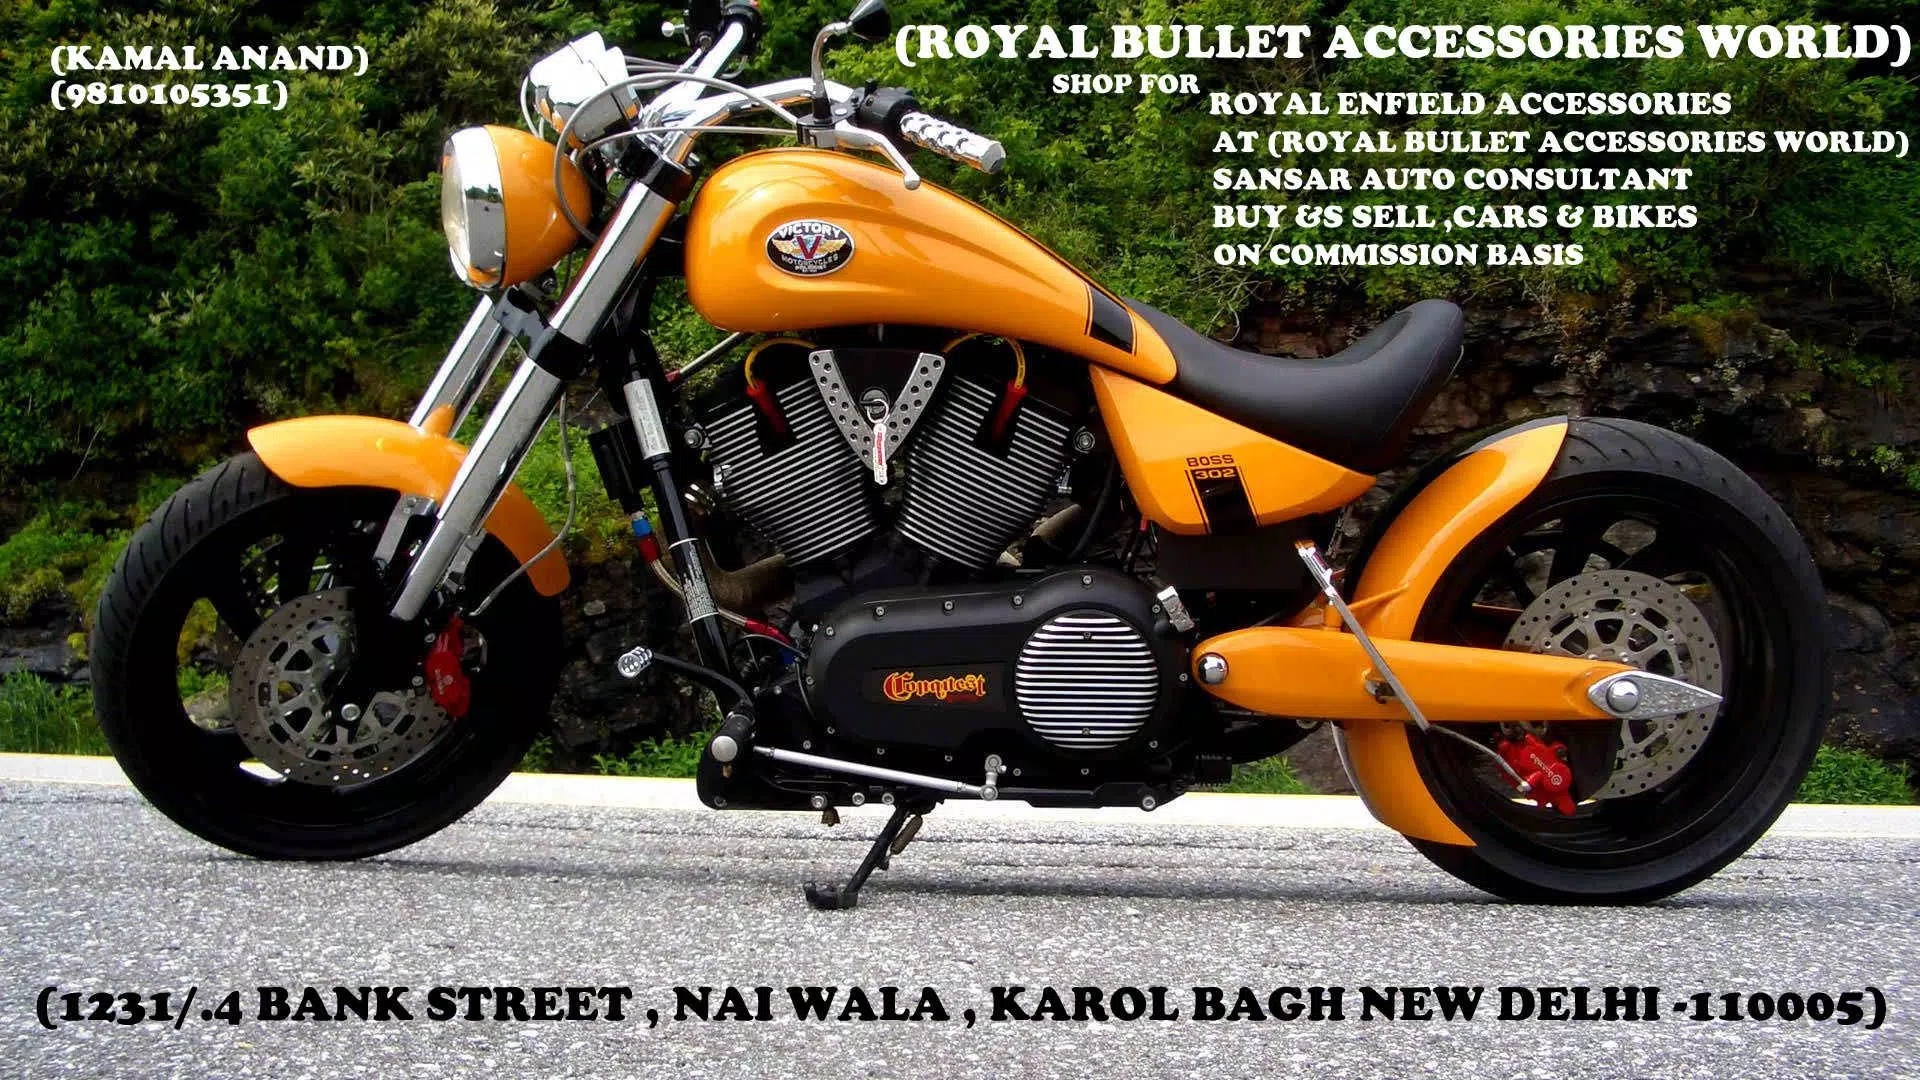 Royal Bullet Accessories World - Red Beauty Accessories and modifications  by Royal Royal Bullet Accessories World For more information WhatsApp  9810105351